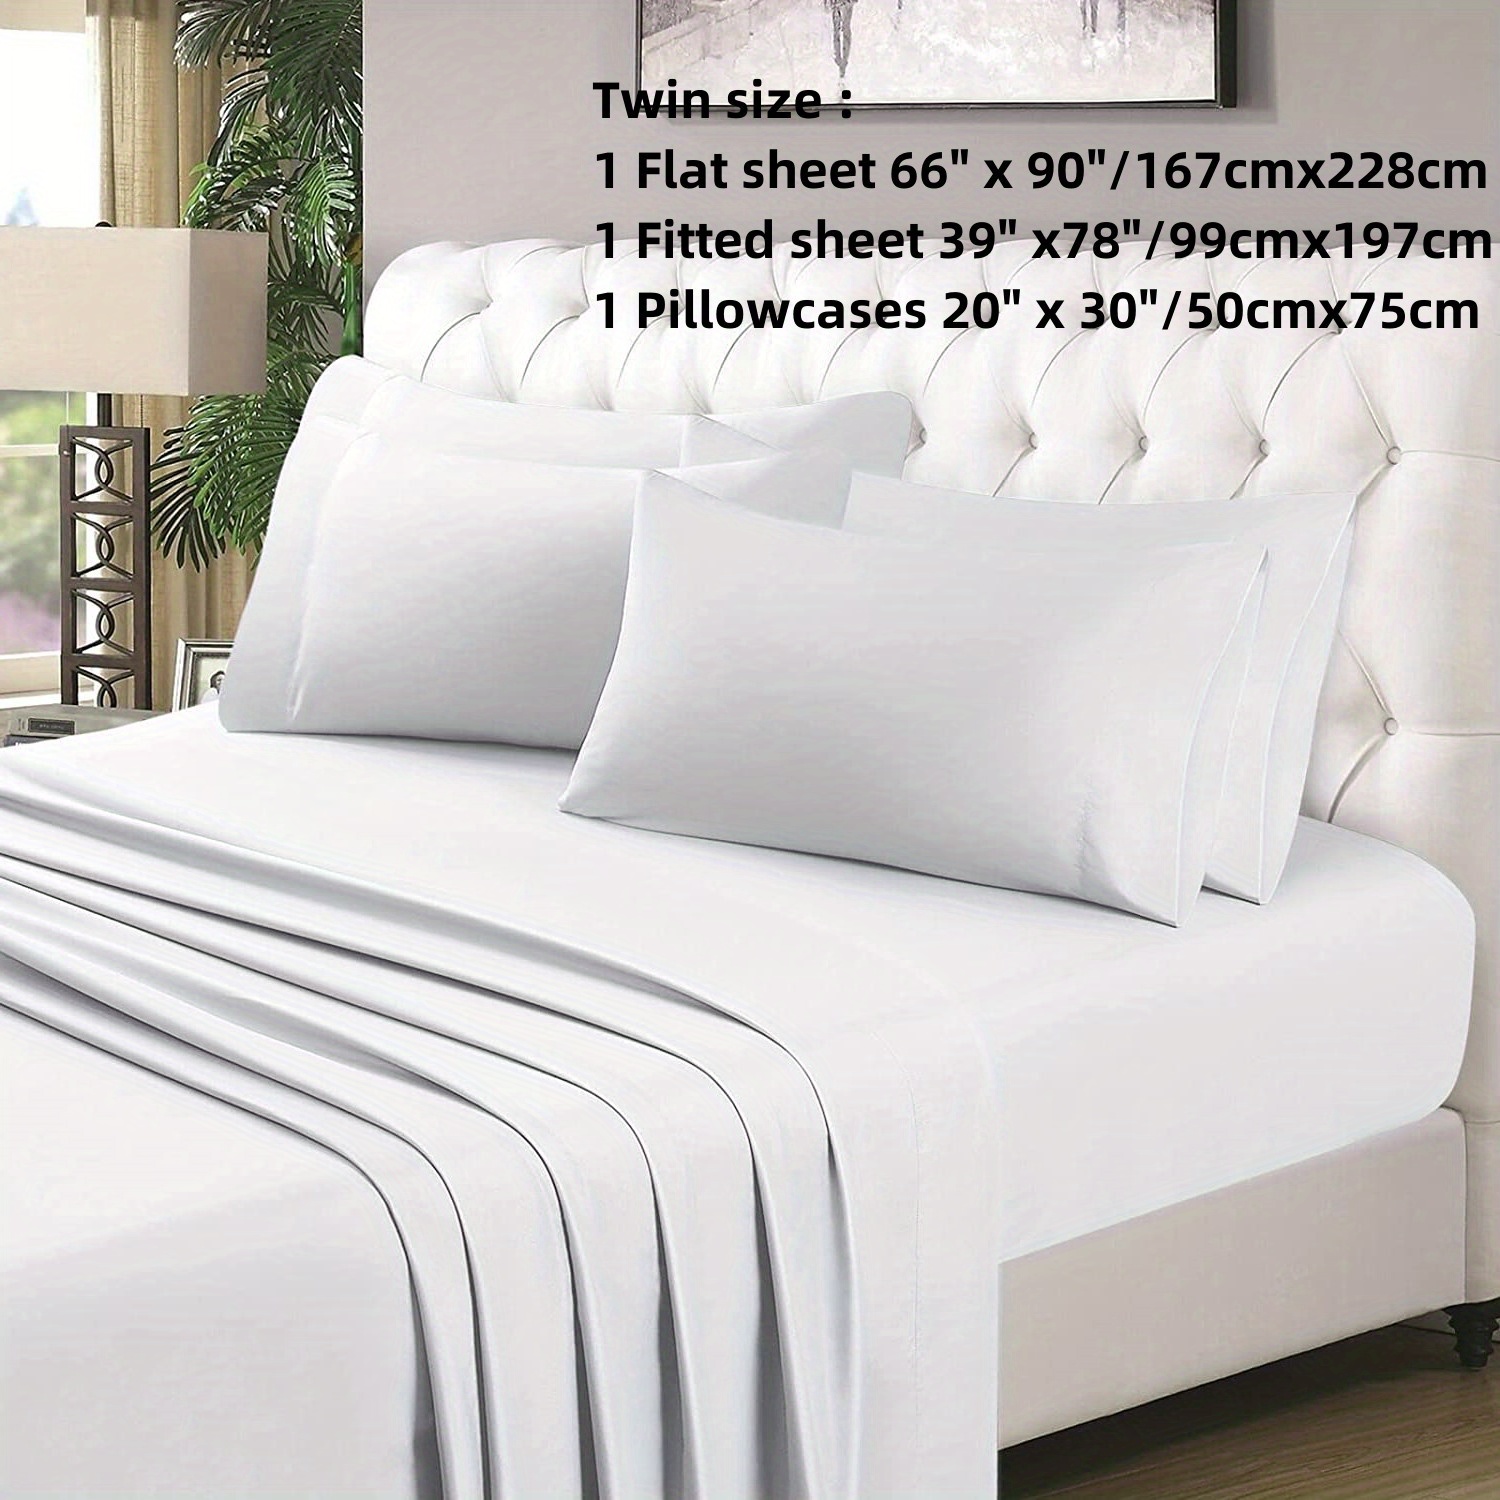 Soft Brushed Microfiber Sheets - Luxurious Bedding